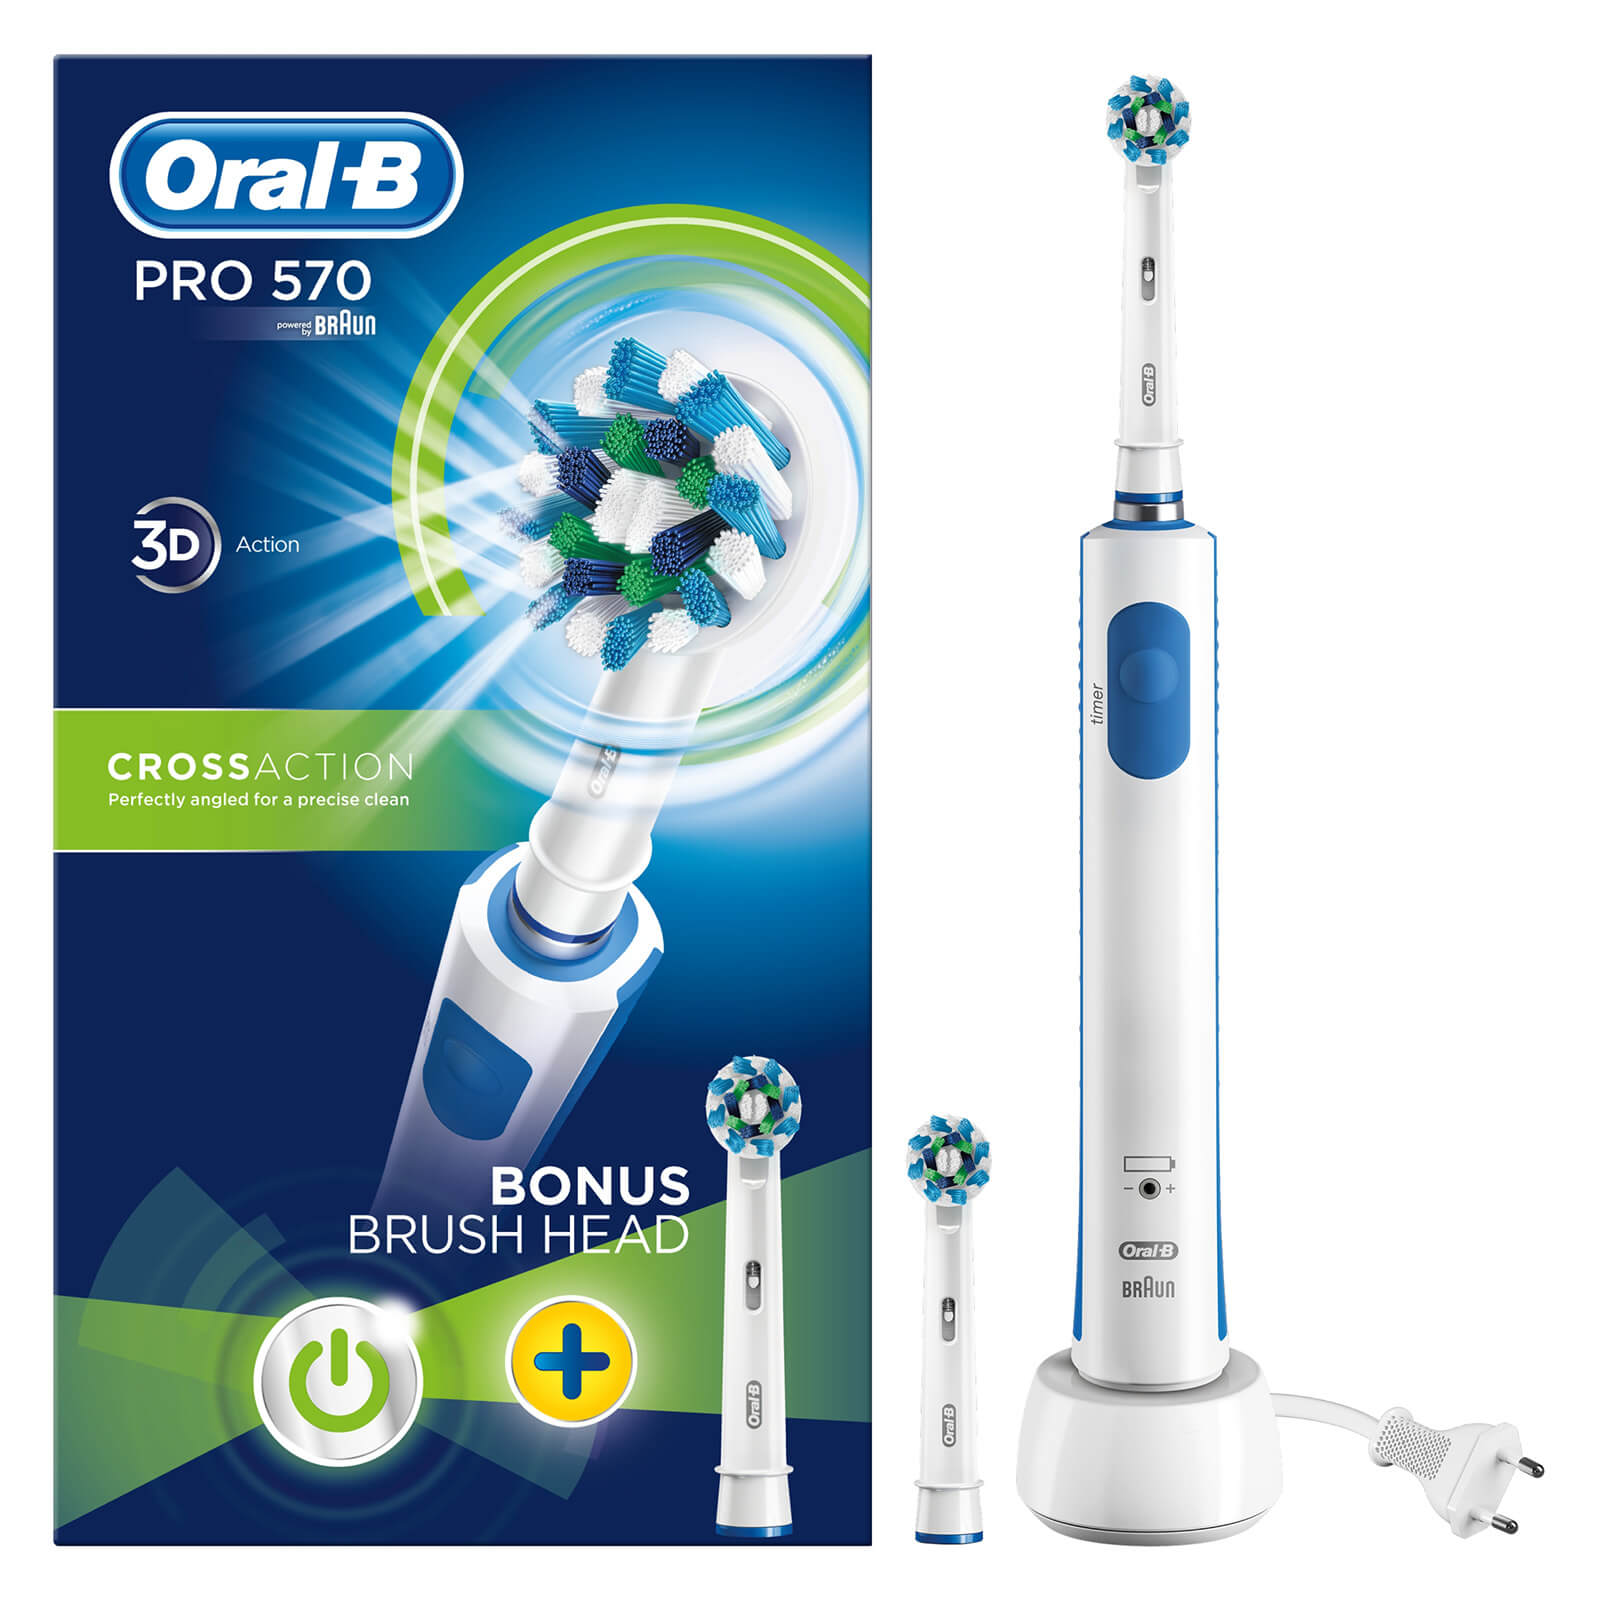 Oral-B Pro 570 Cross Action Electric Toothbrush lookfantastic.com imagine